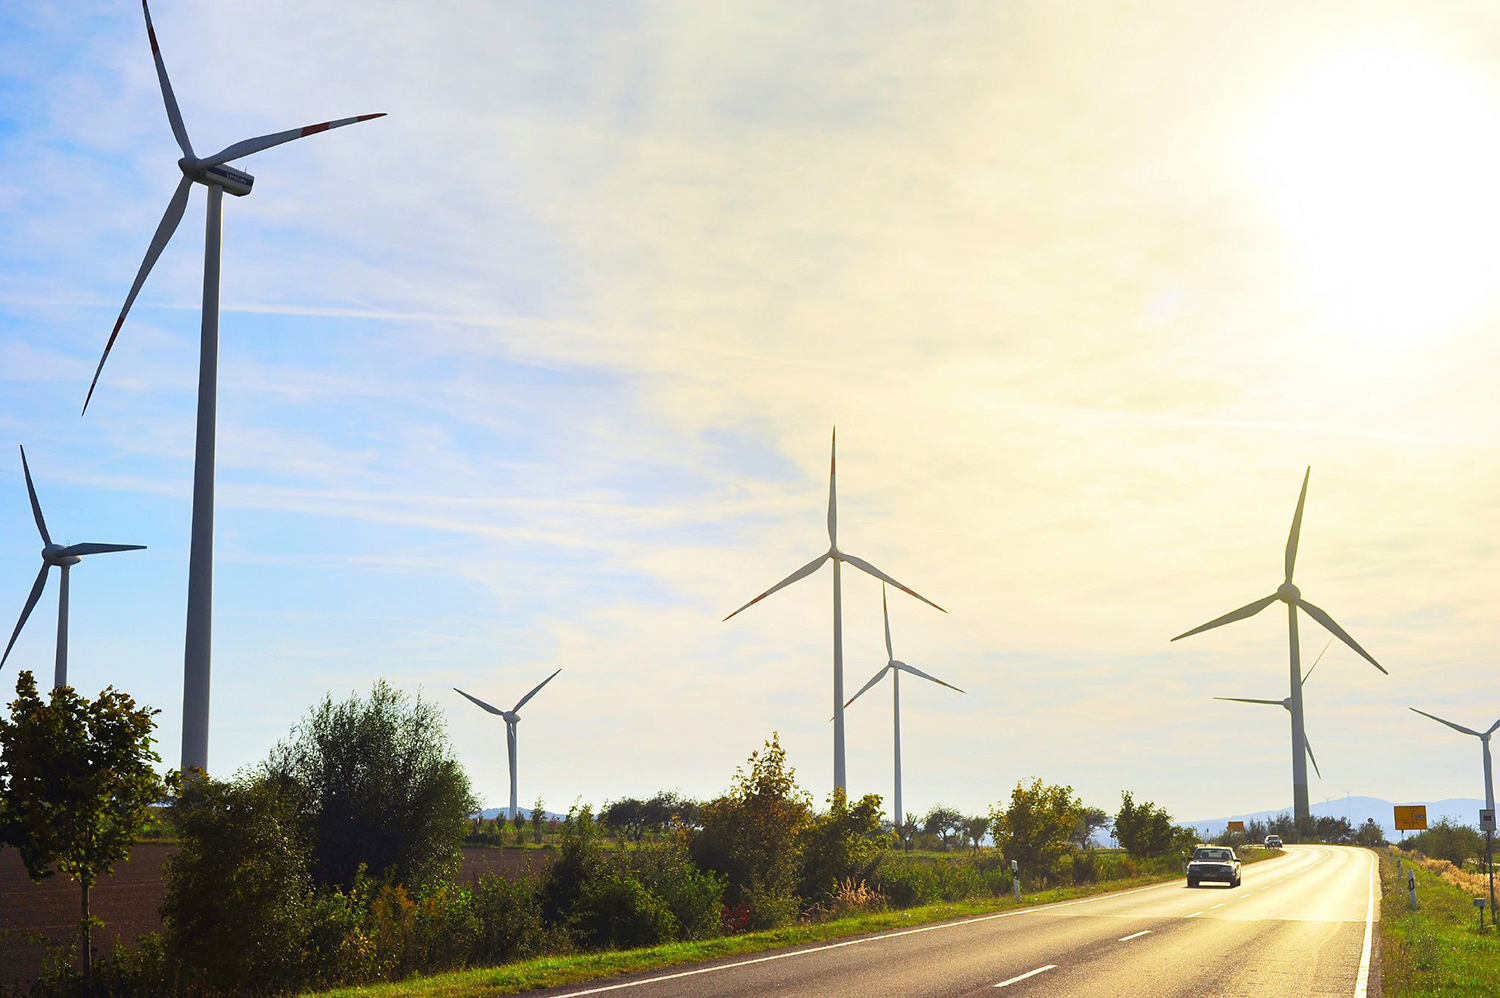 Onshore wind turbines rely on yaw brakes to face into the wind and generate power efficiently. (Image Source: iStock_000045991968)